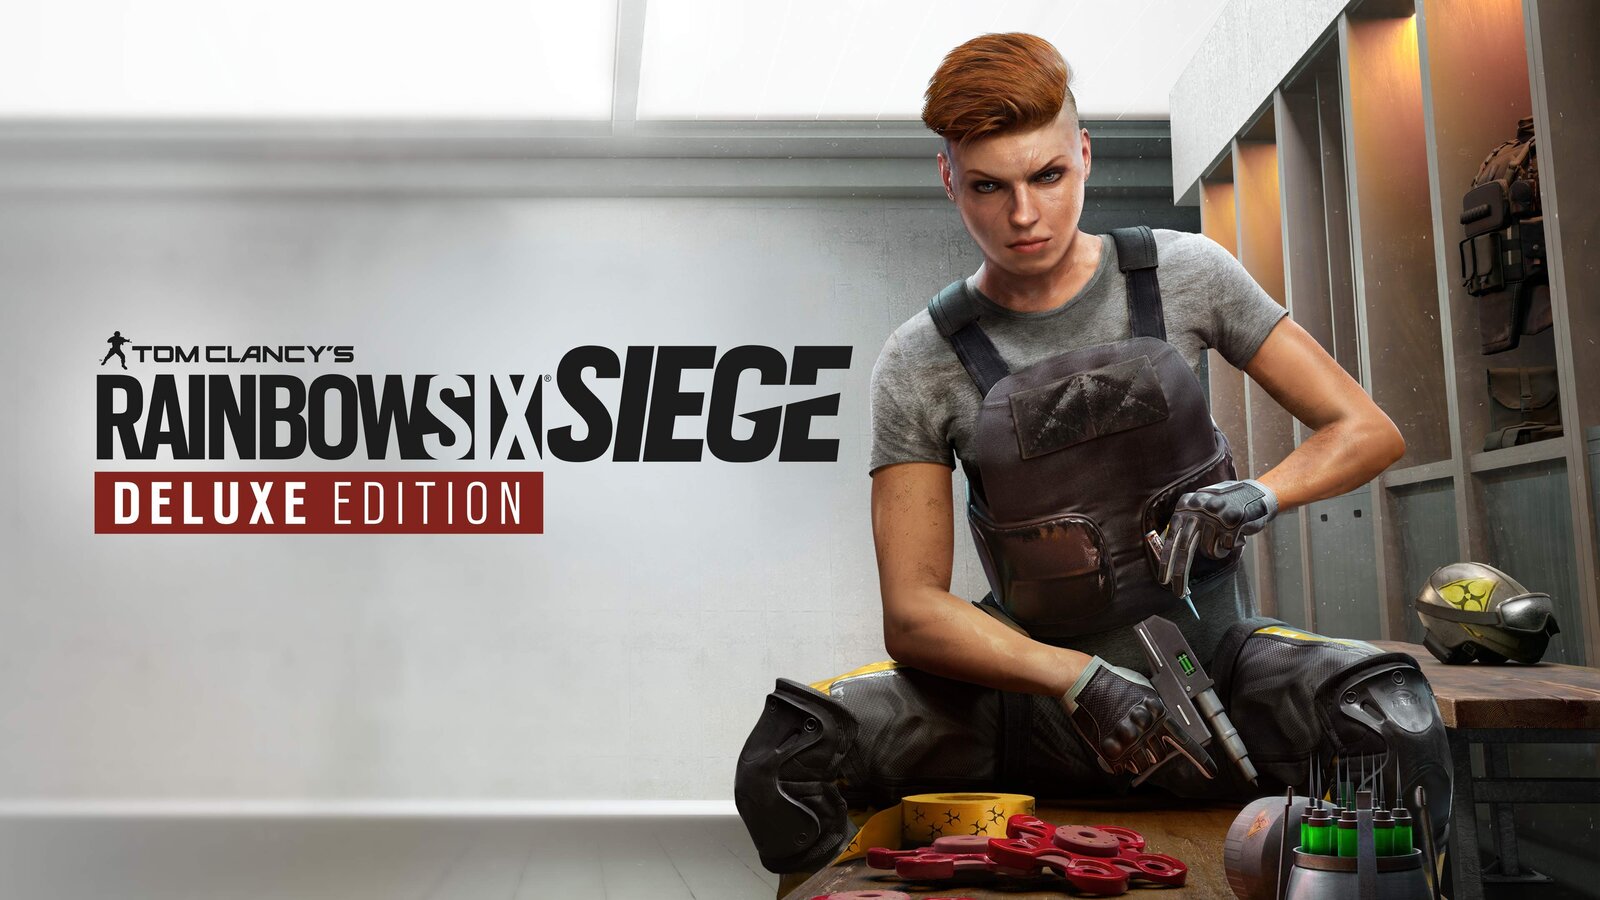 Tom Clancy's Rainbow Six: Siege - Deluxe Edition (Year 6)